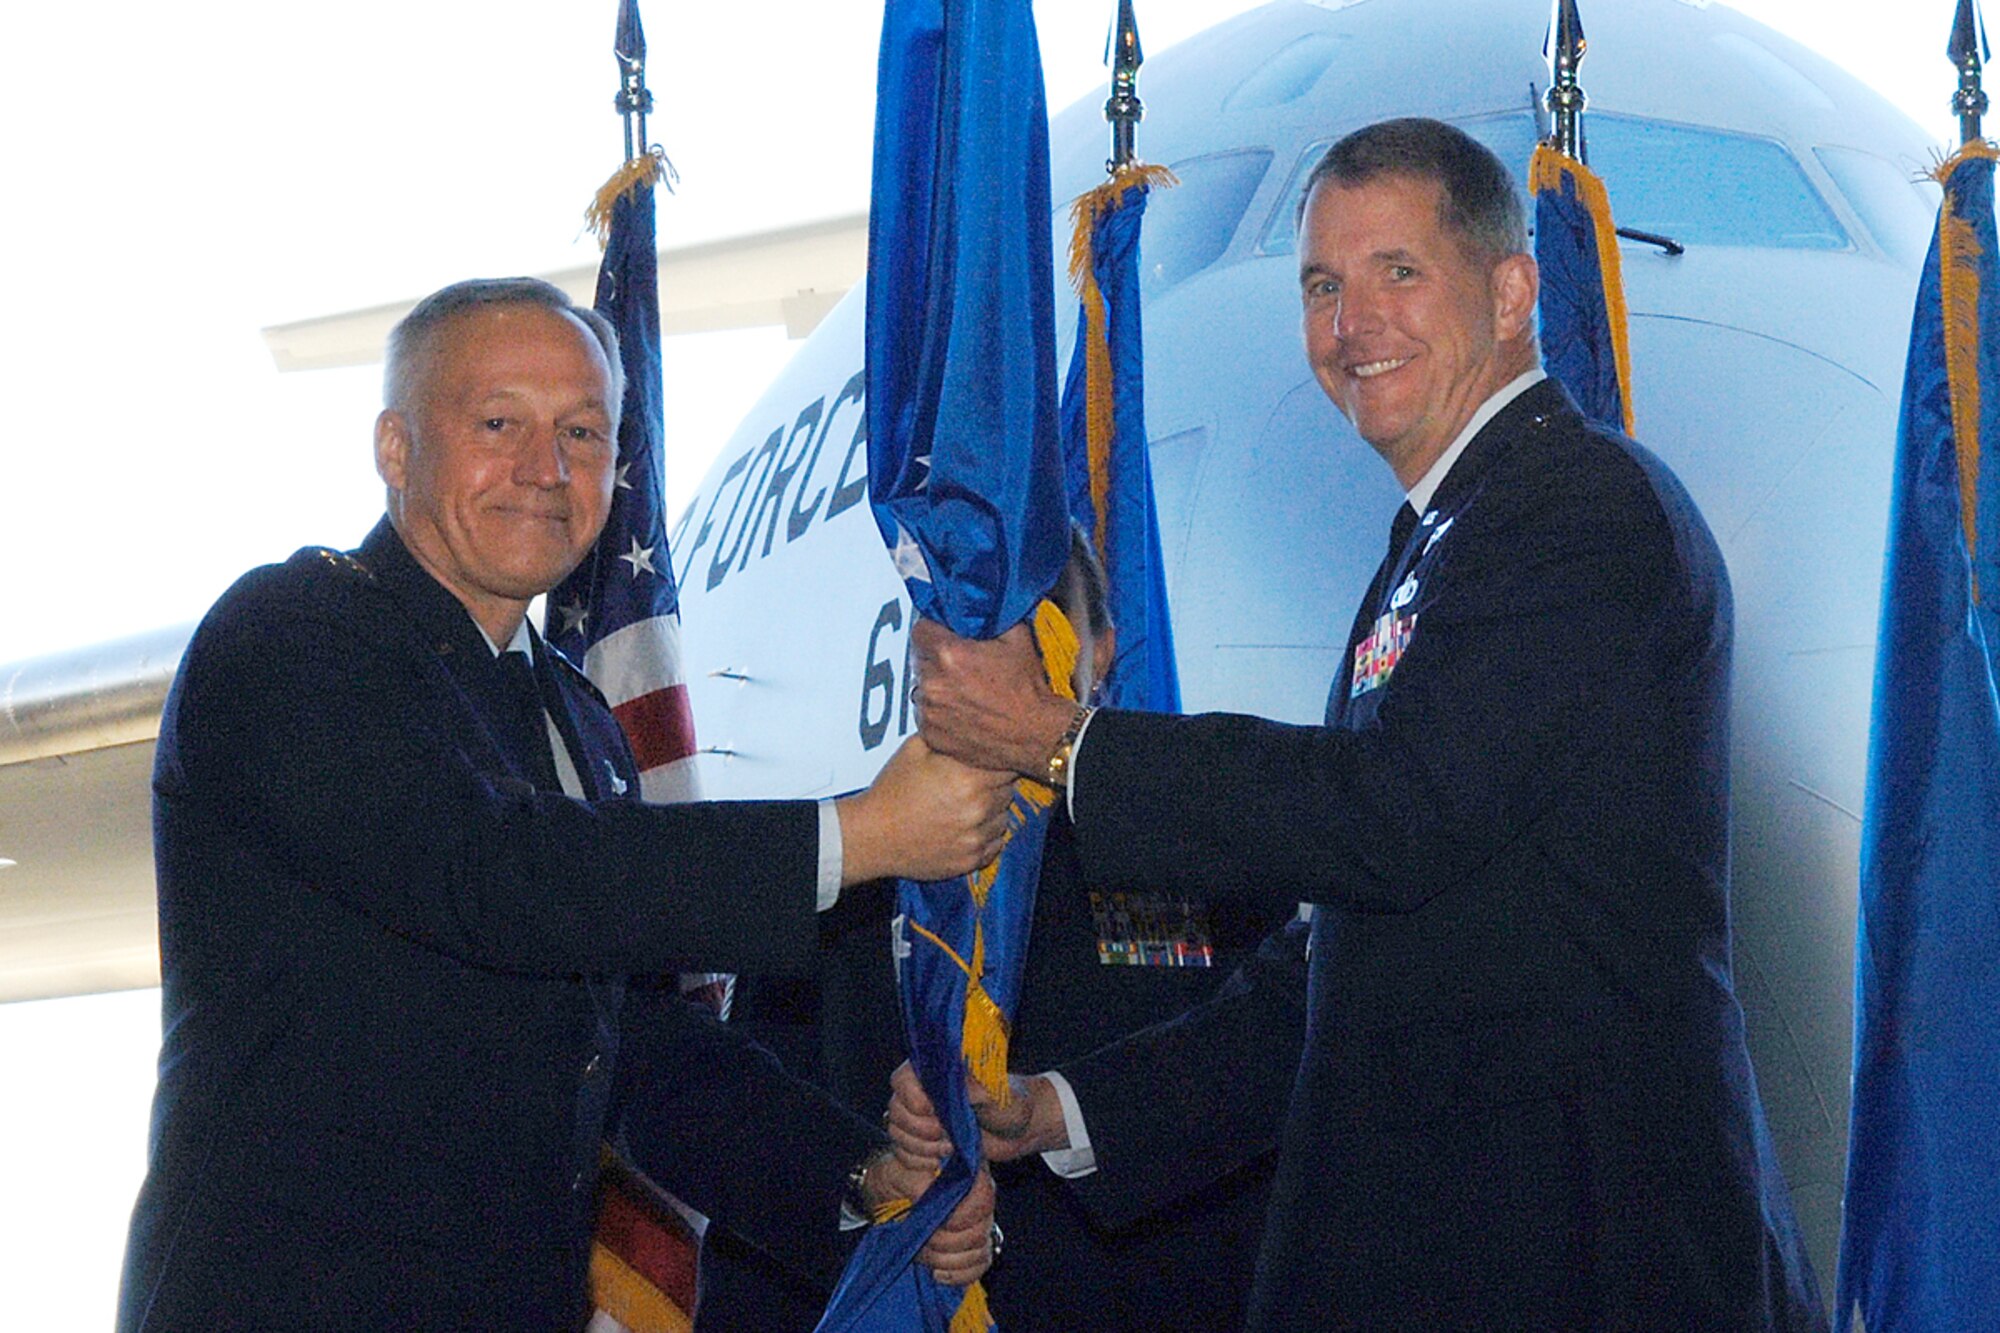 HANSCOM AFB, Mass. -- Gen. Bruce Carlson, commander of Air Force Materiel Command, presents the Electronic Systems Center flag to Lt. Gen. Ted Bowlds who took command of ESC during a ceremony Nov. 7 in the Hanscom Aero Club Hangar. (U.S. Air Force photo by Jan Abate)